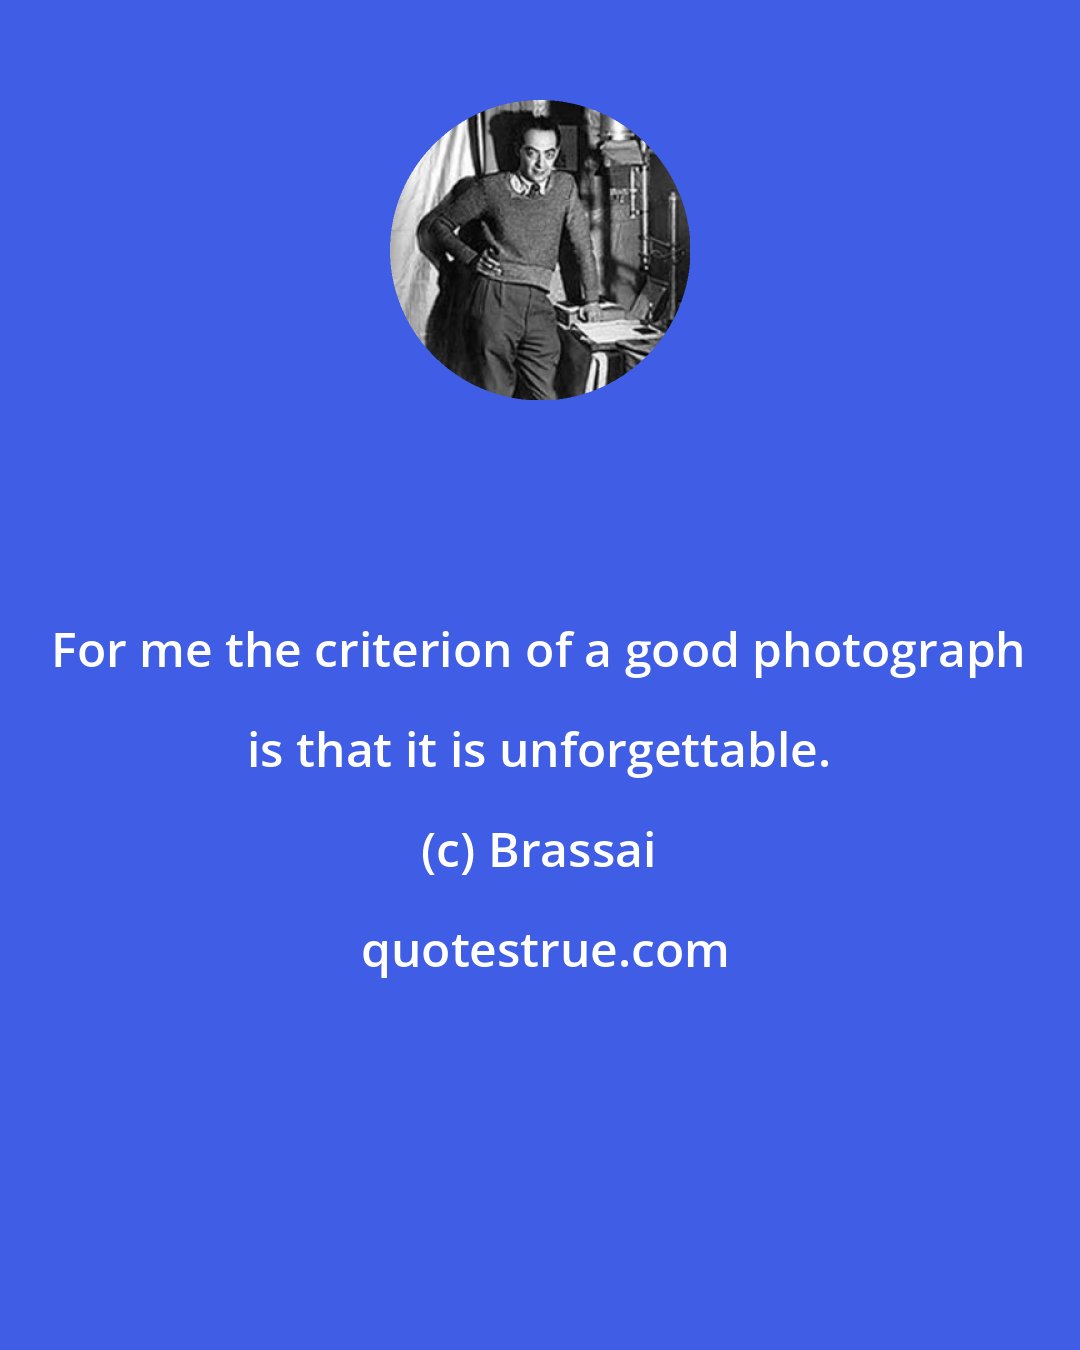 Brassai: For me the criterion of a good photograph is that it is unforgettable.